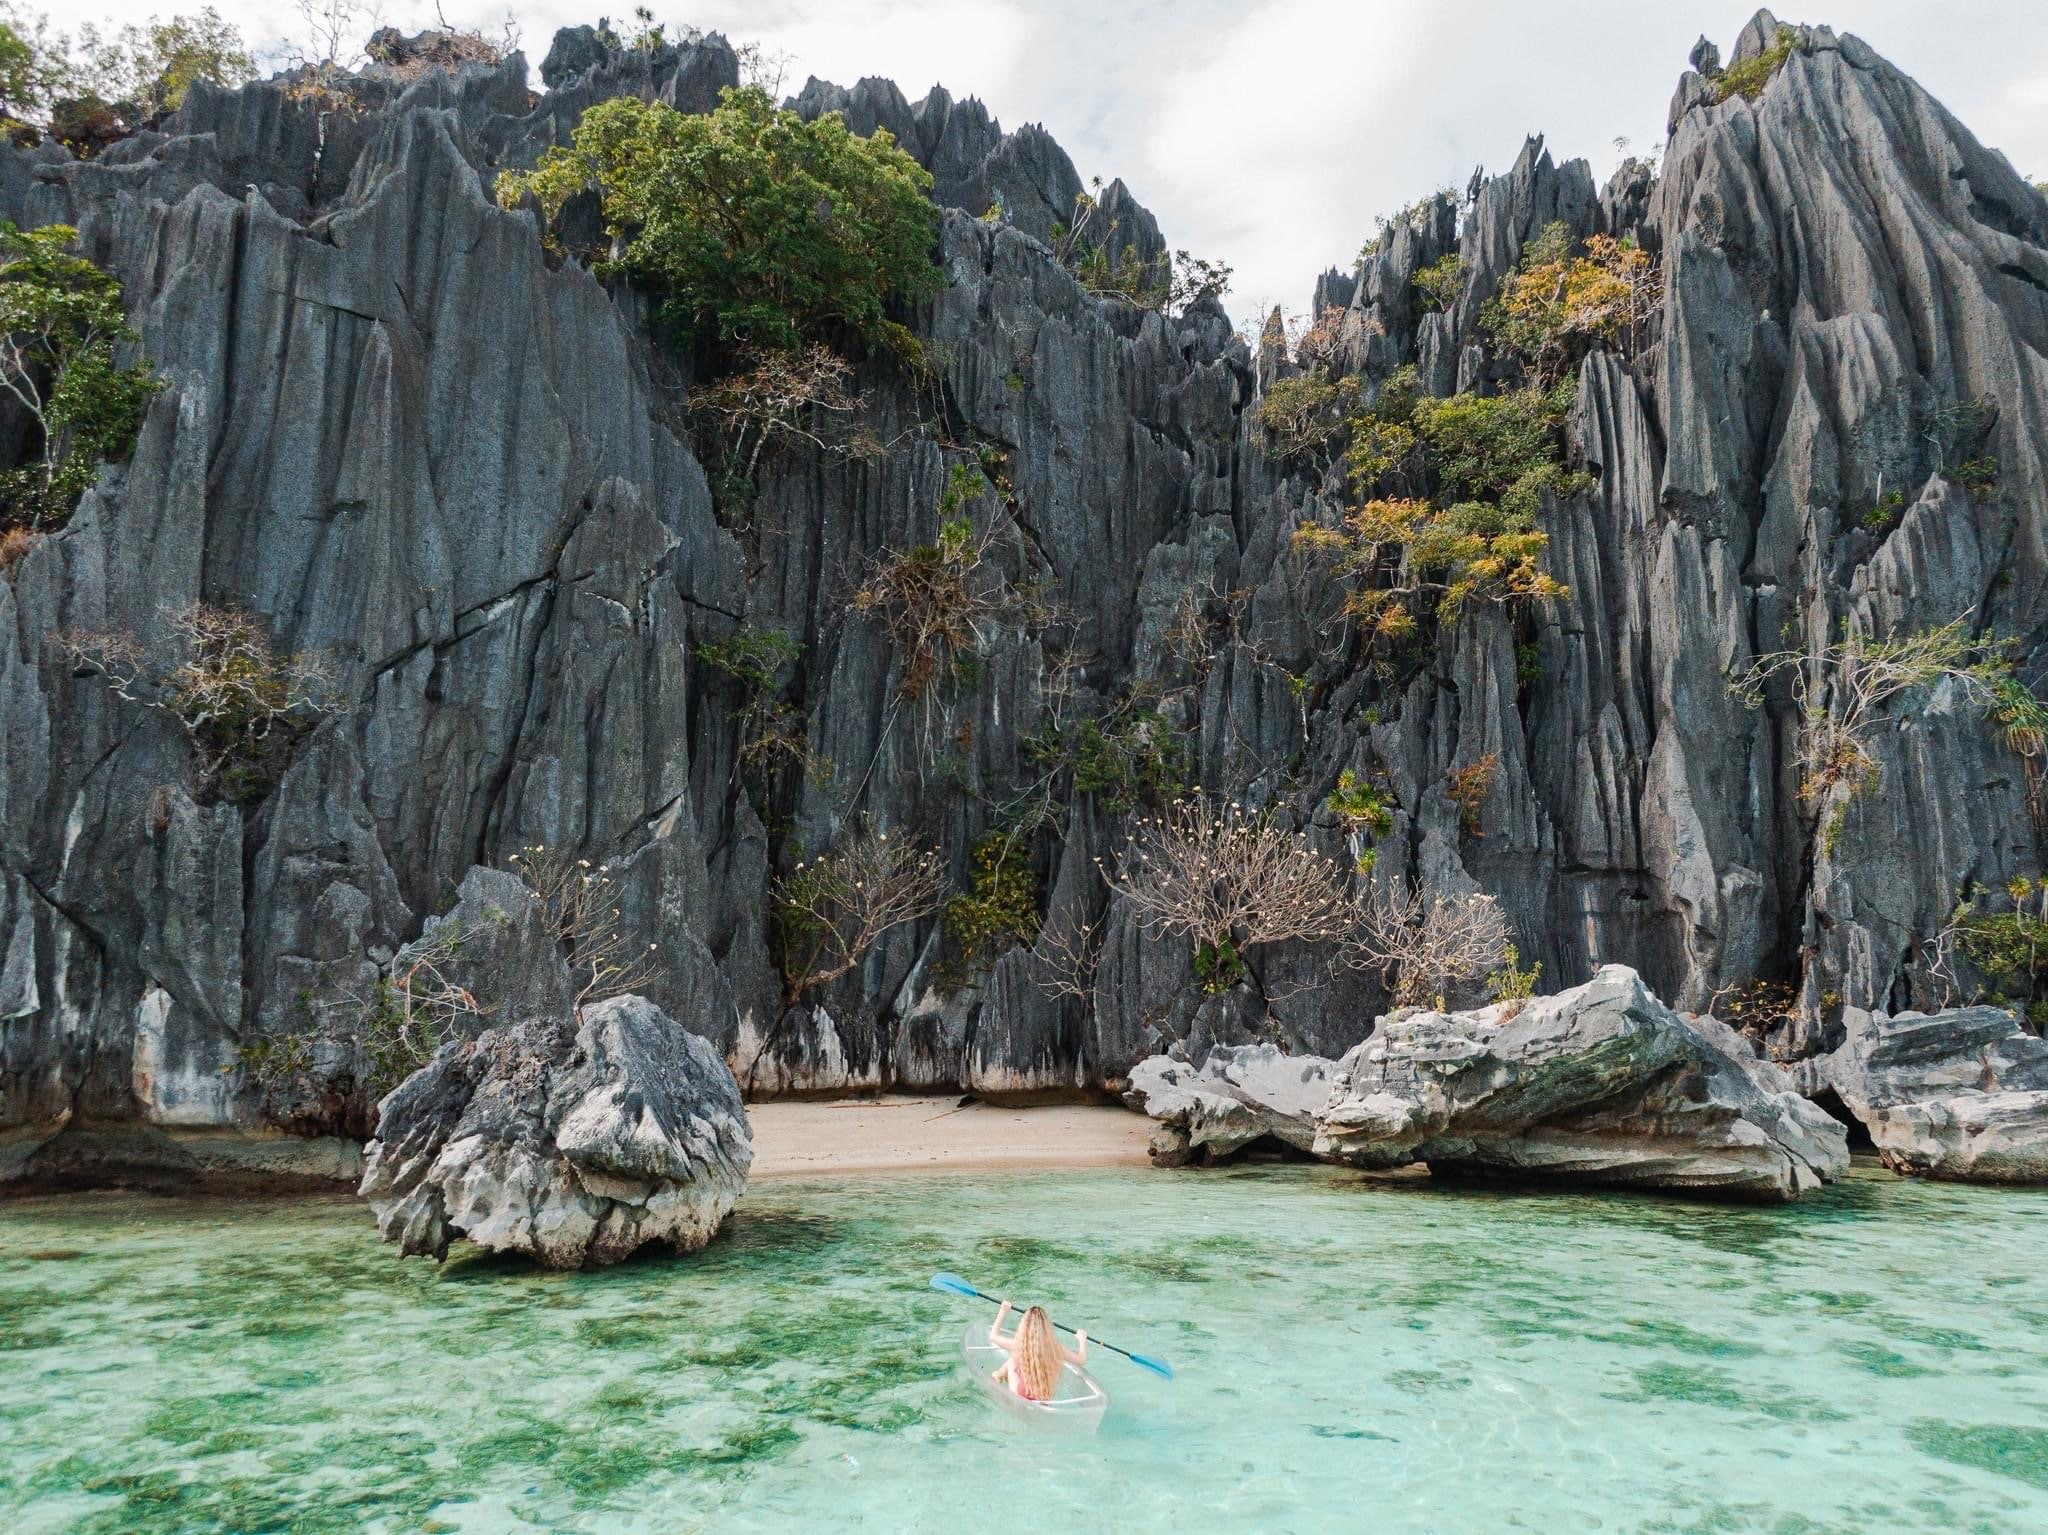 Twin-lagoon-top-spots-to-visit-coron-palawan-private-island-hopping-boat-tour